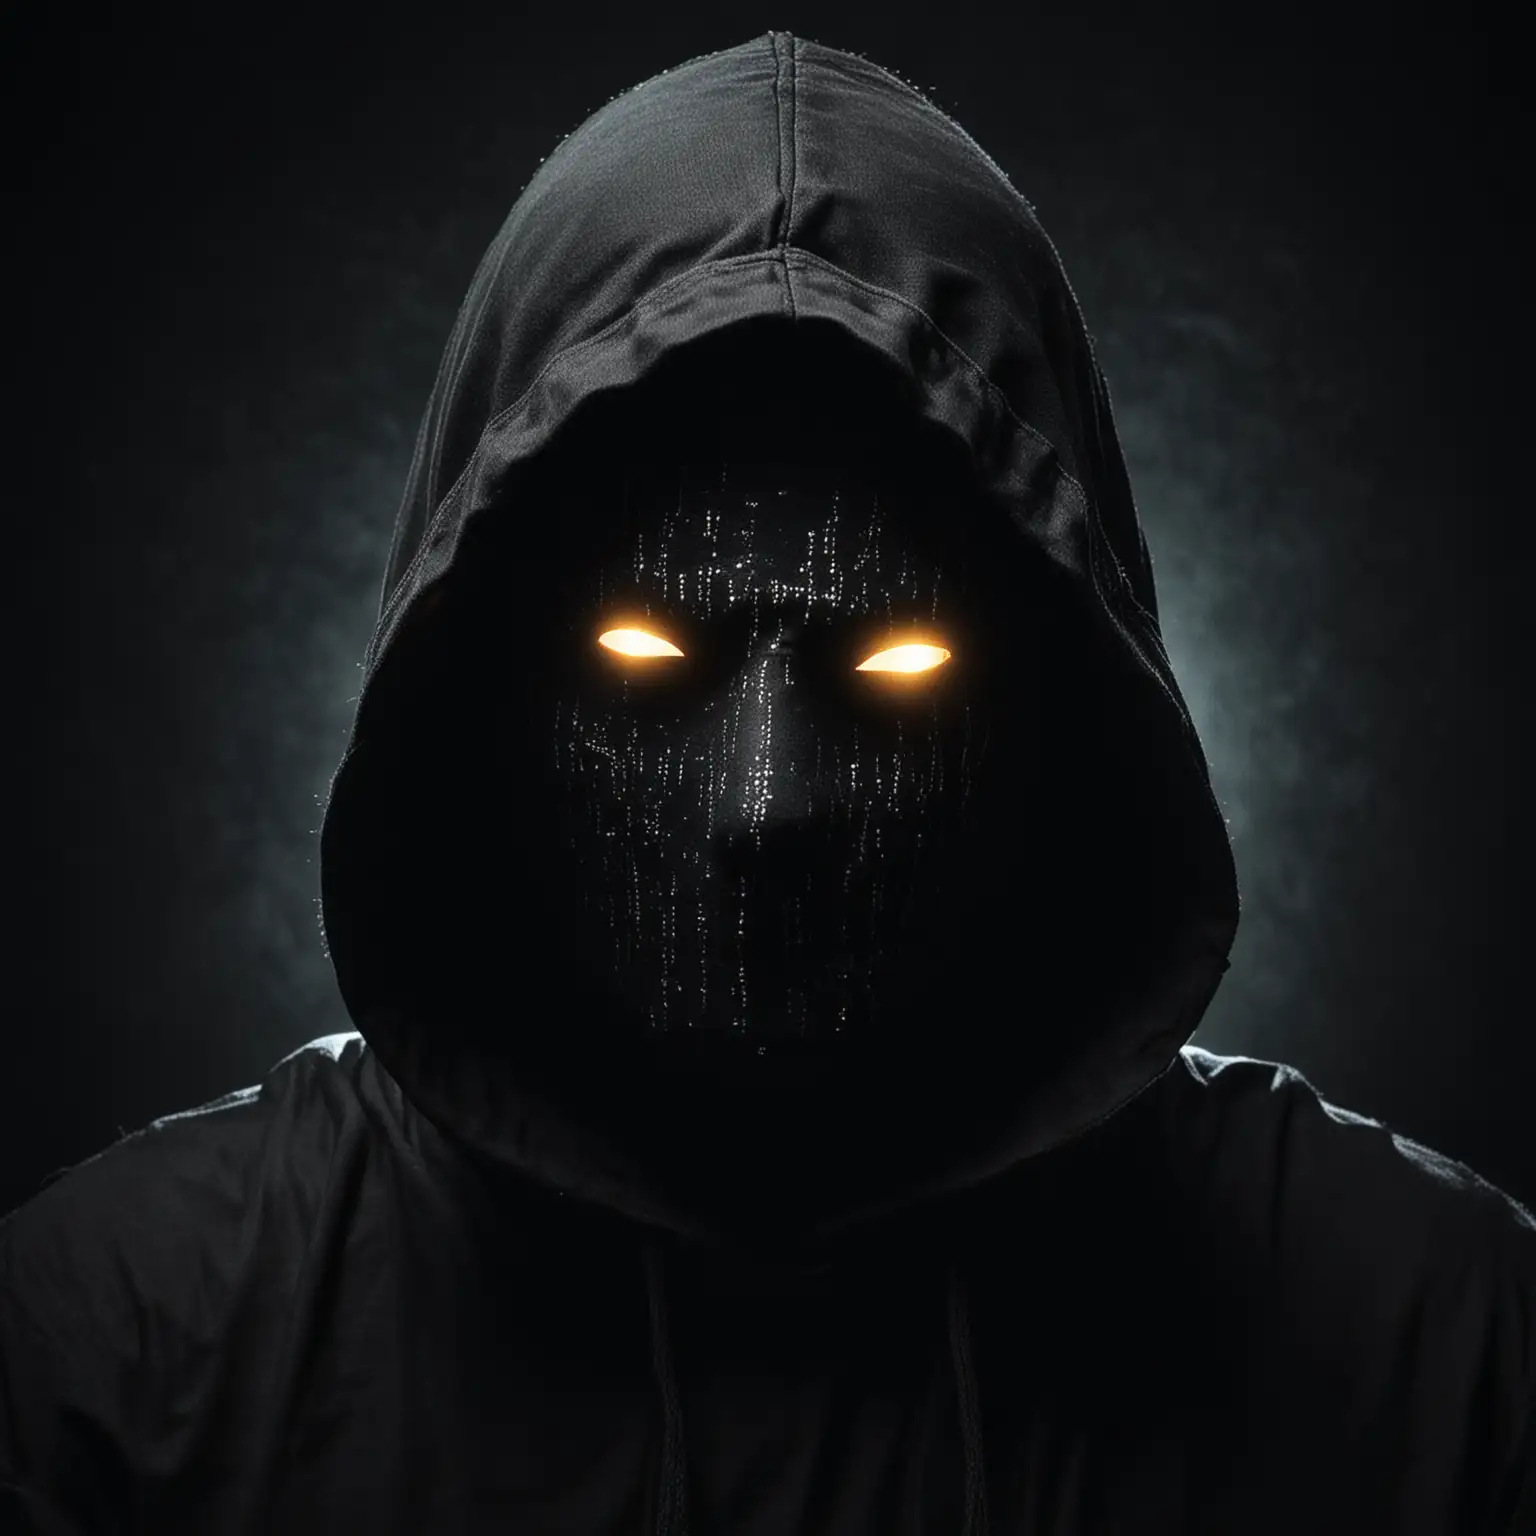 Enigmatic Figure with Glowing Eyes in Hooded Silhouette